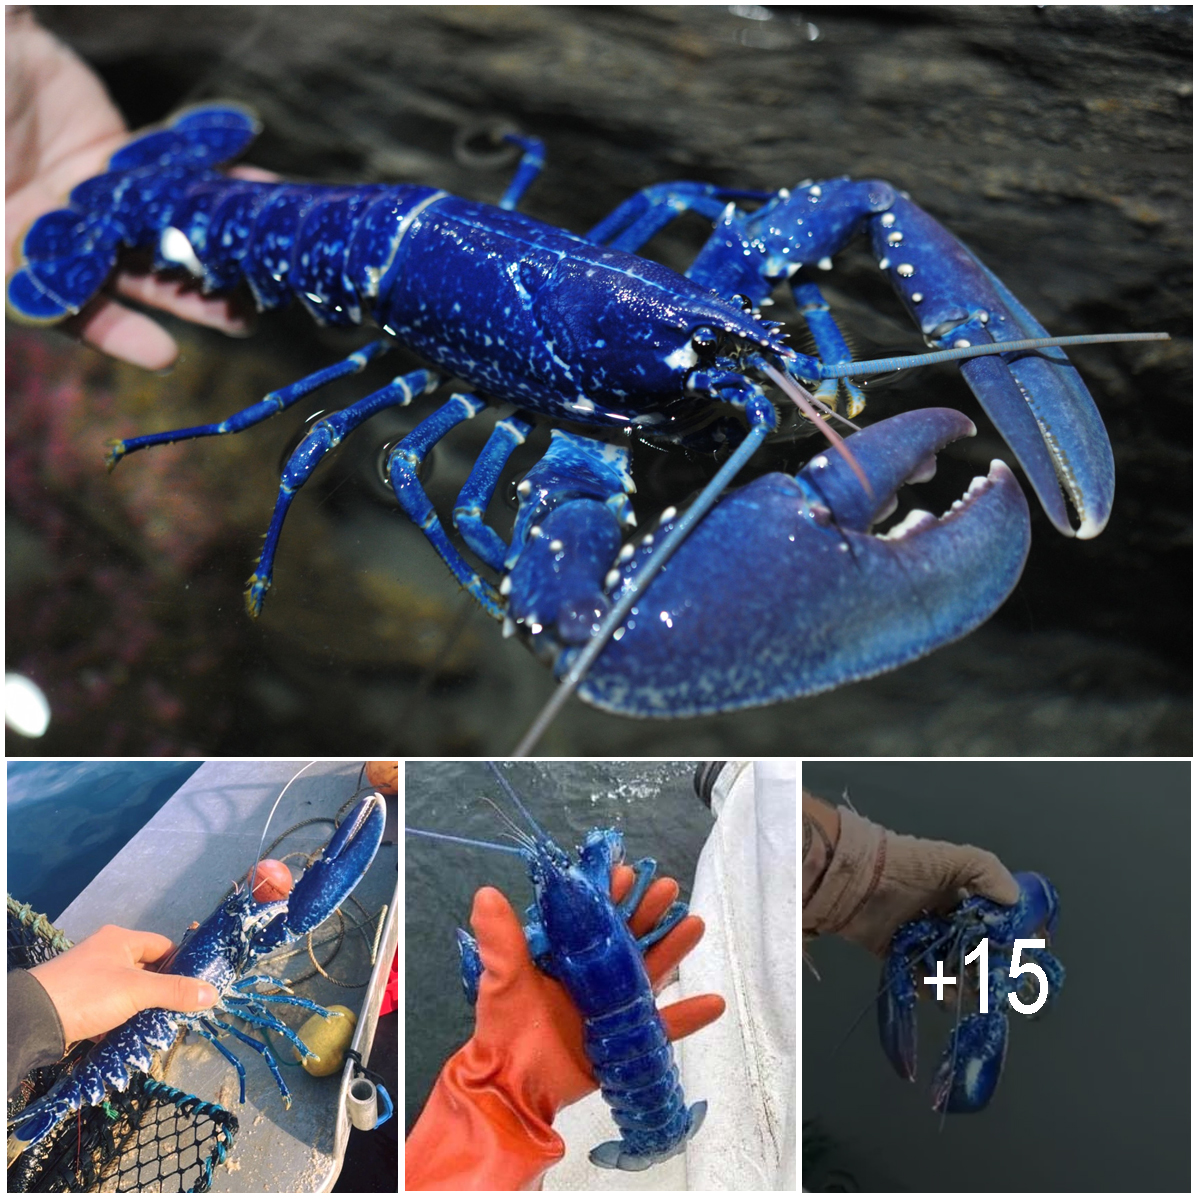 Stunned British Fisherman Catches Ultra-Rare Blue Lobster, Dubbed ‘One in 2 Million,’ and Immediately Releases It